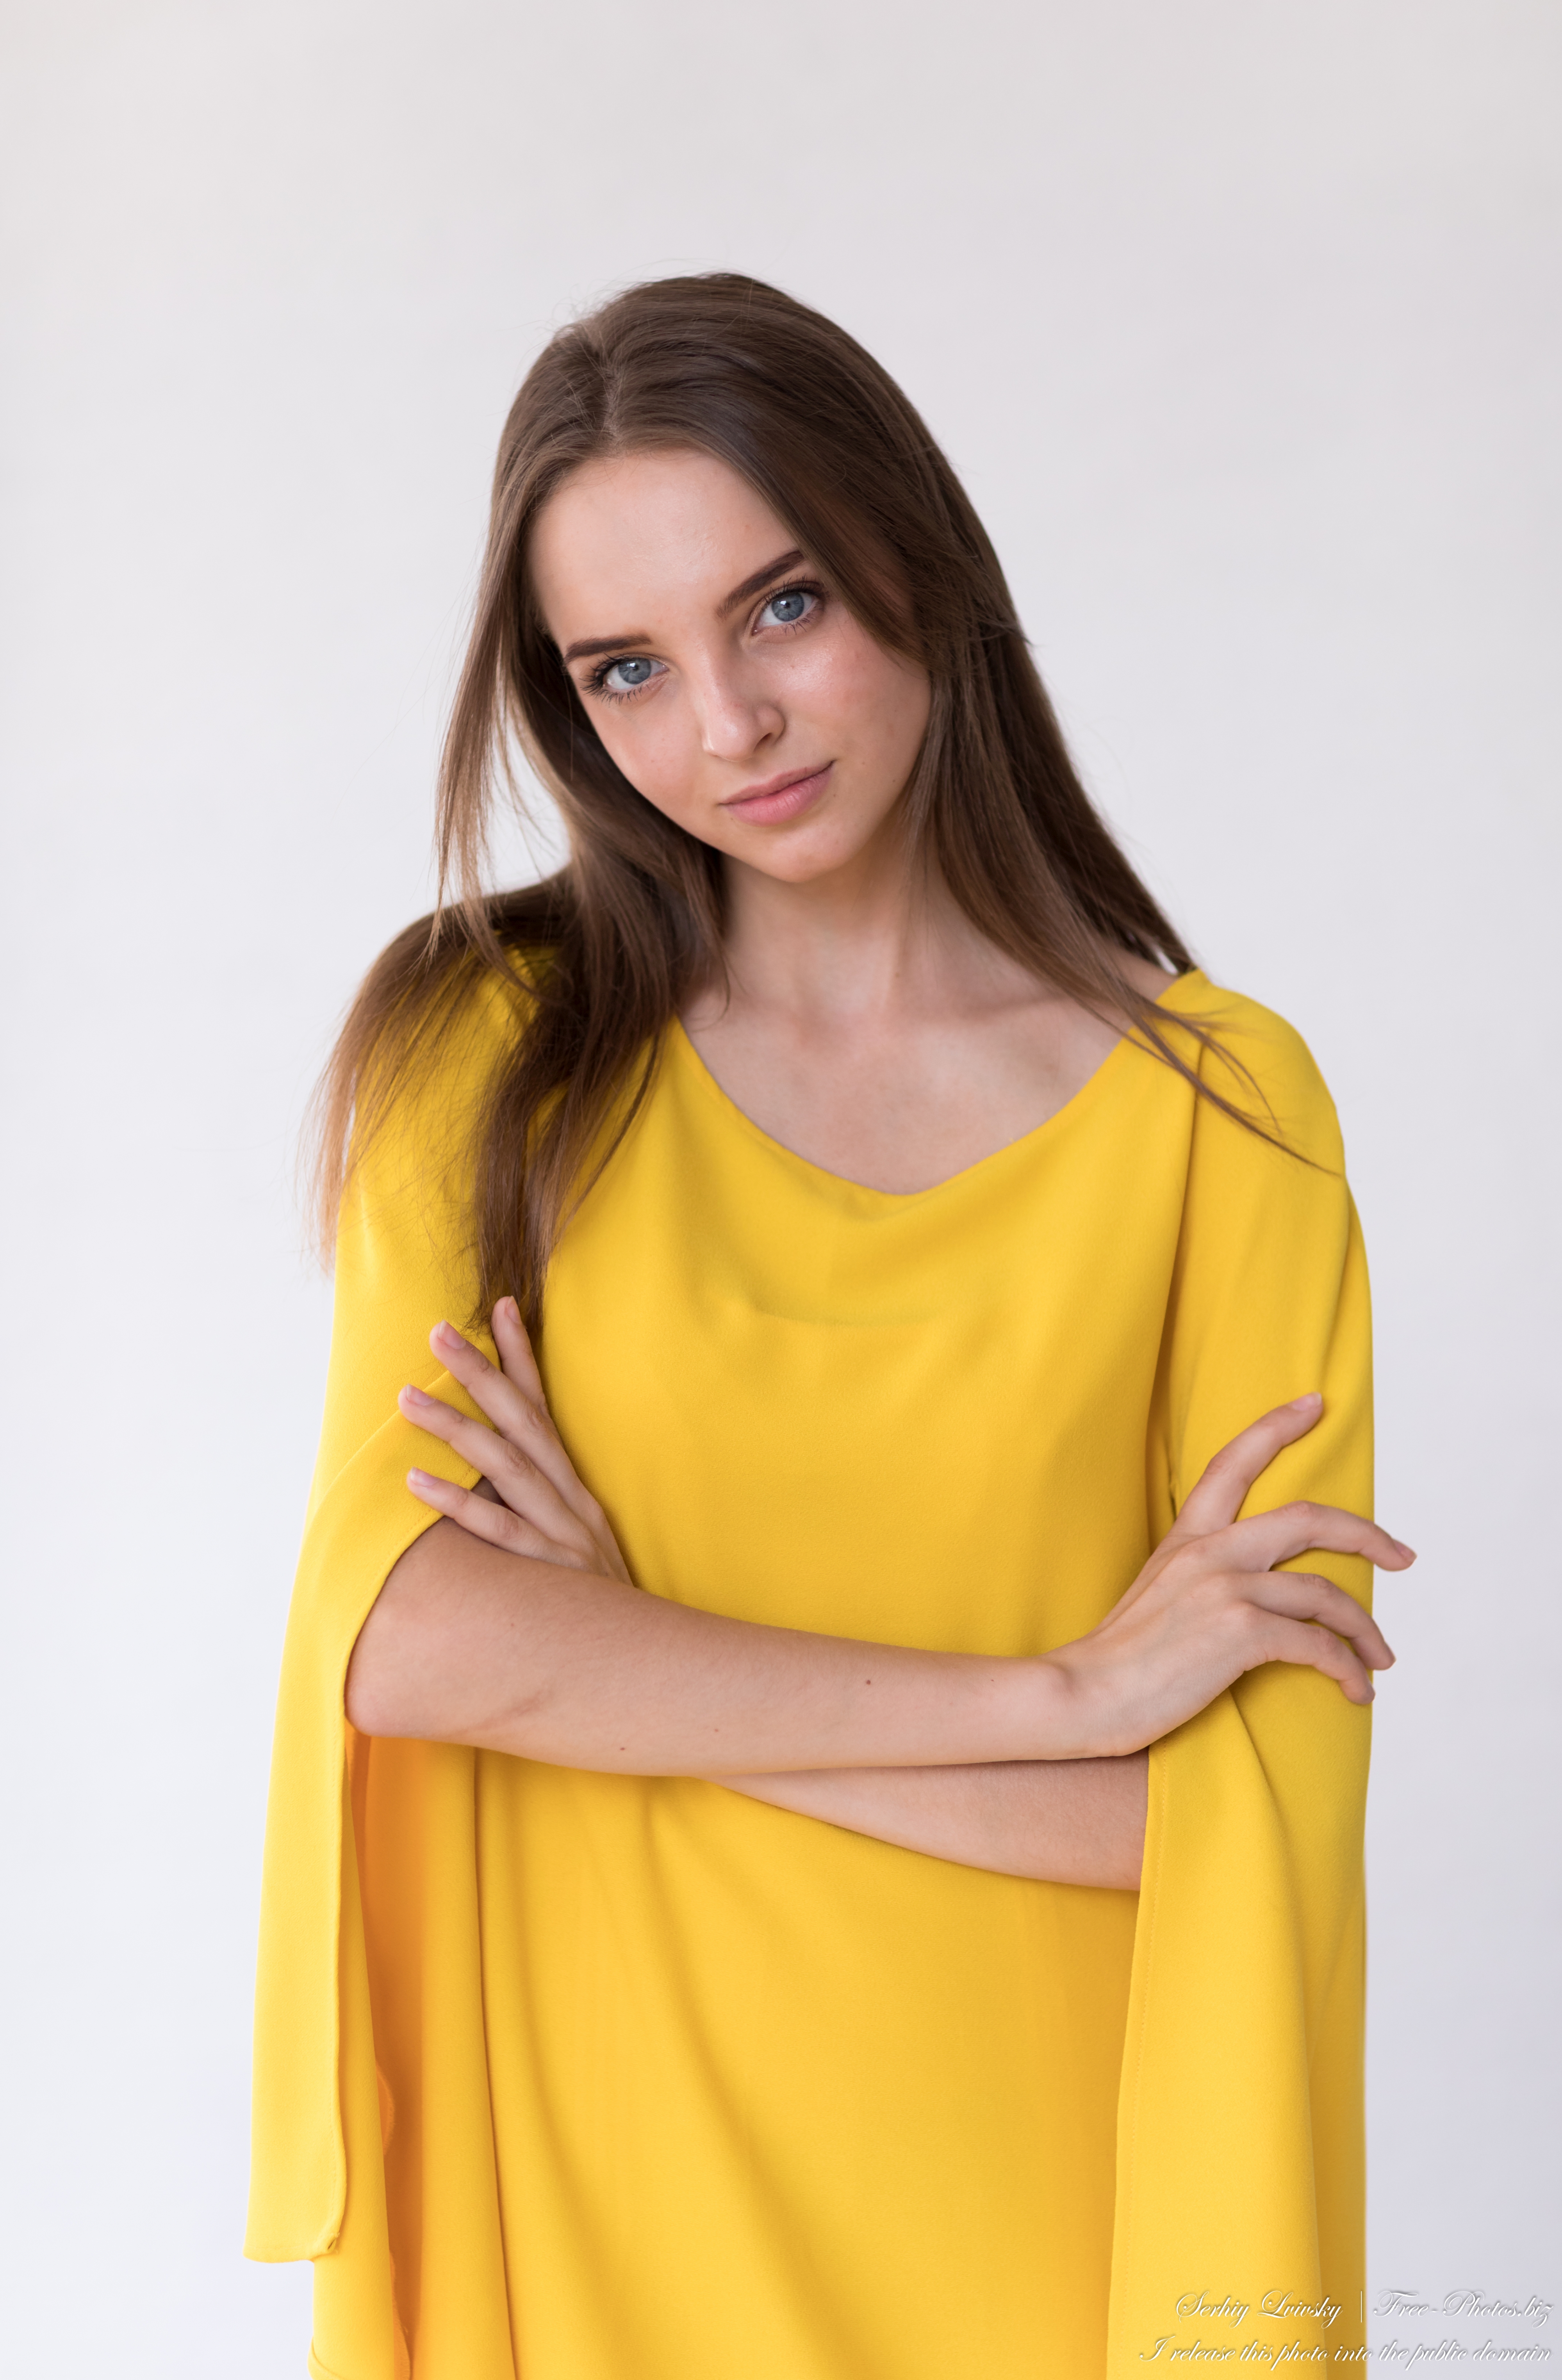 vika_a_17-year-old_girl_photographed_by_serhiy_lvivsky_in_sept_2020_02